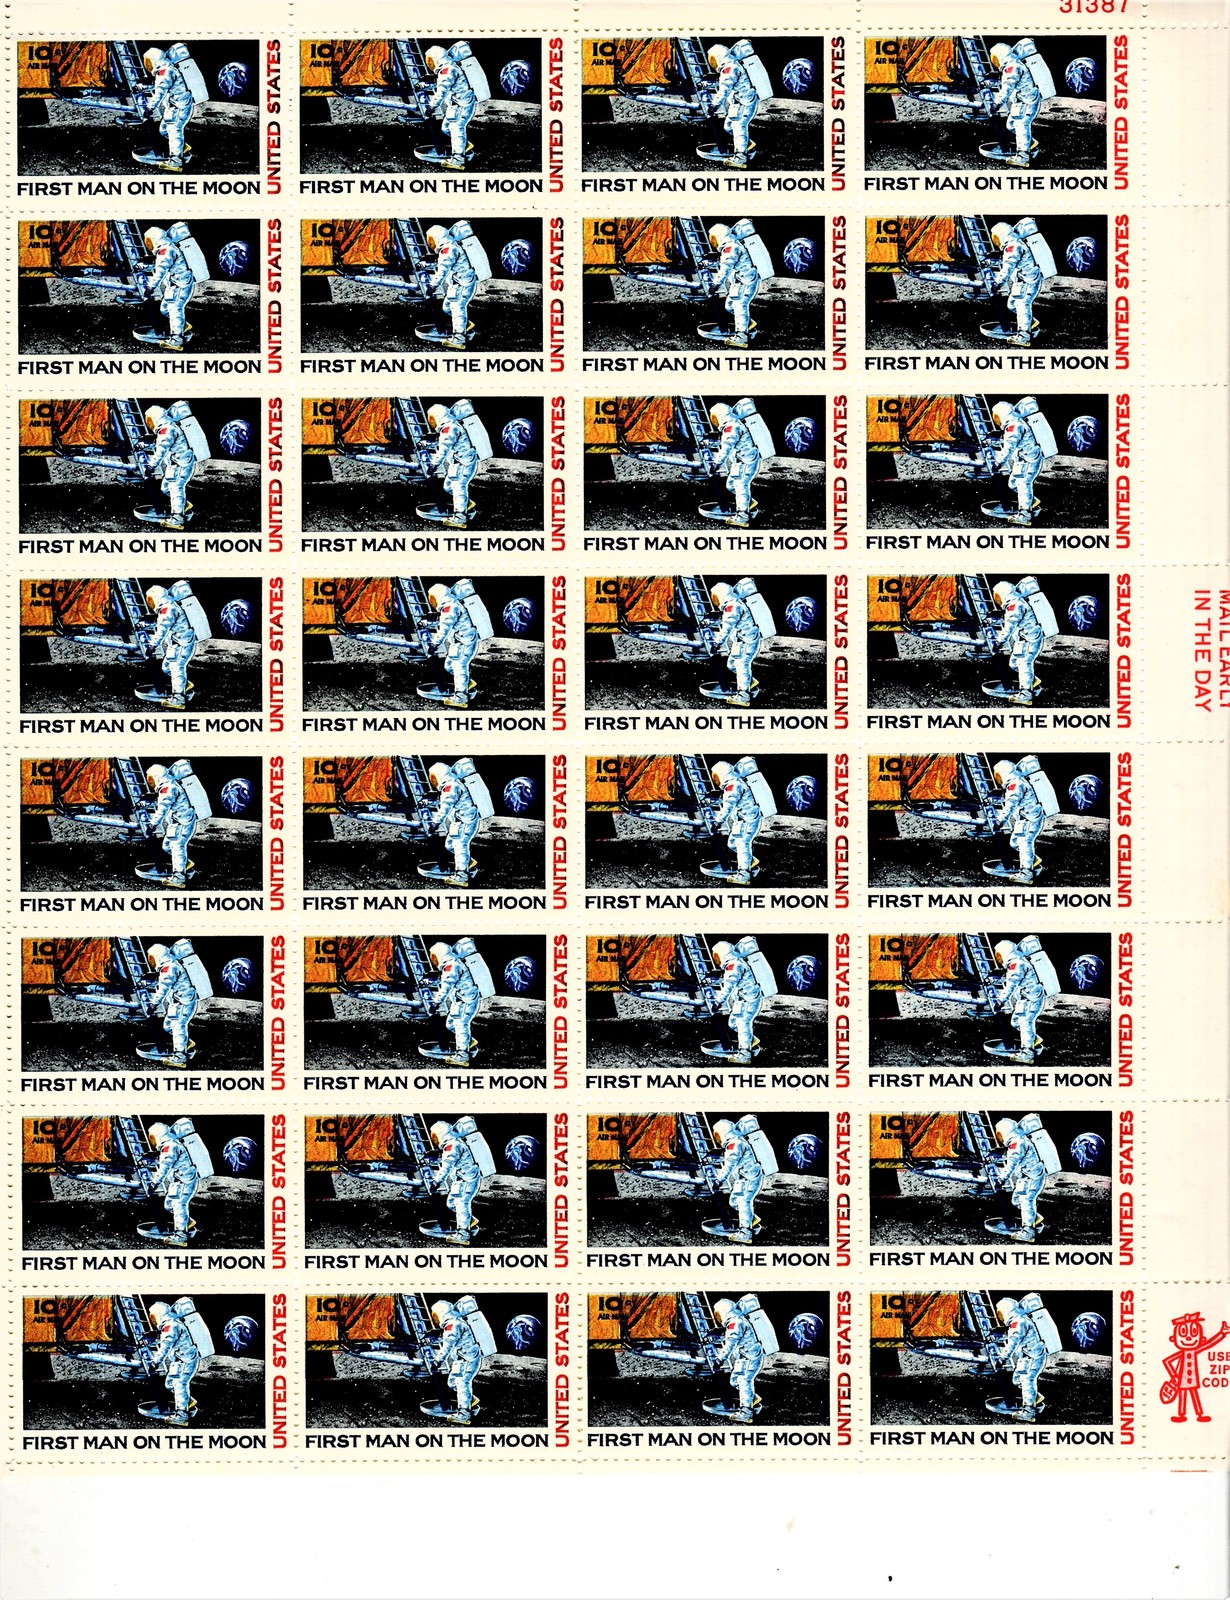 Primary image for USPS Stamps -1969 First Man on the Moon Mint Sheet of 32 U.S. Stamps 10 cent